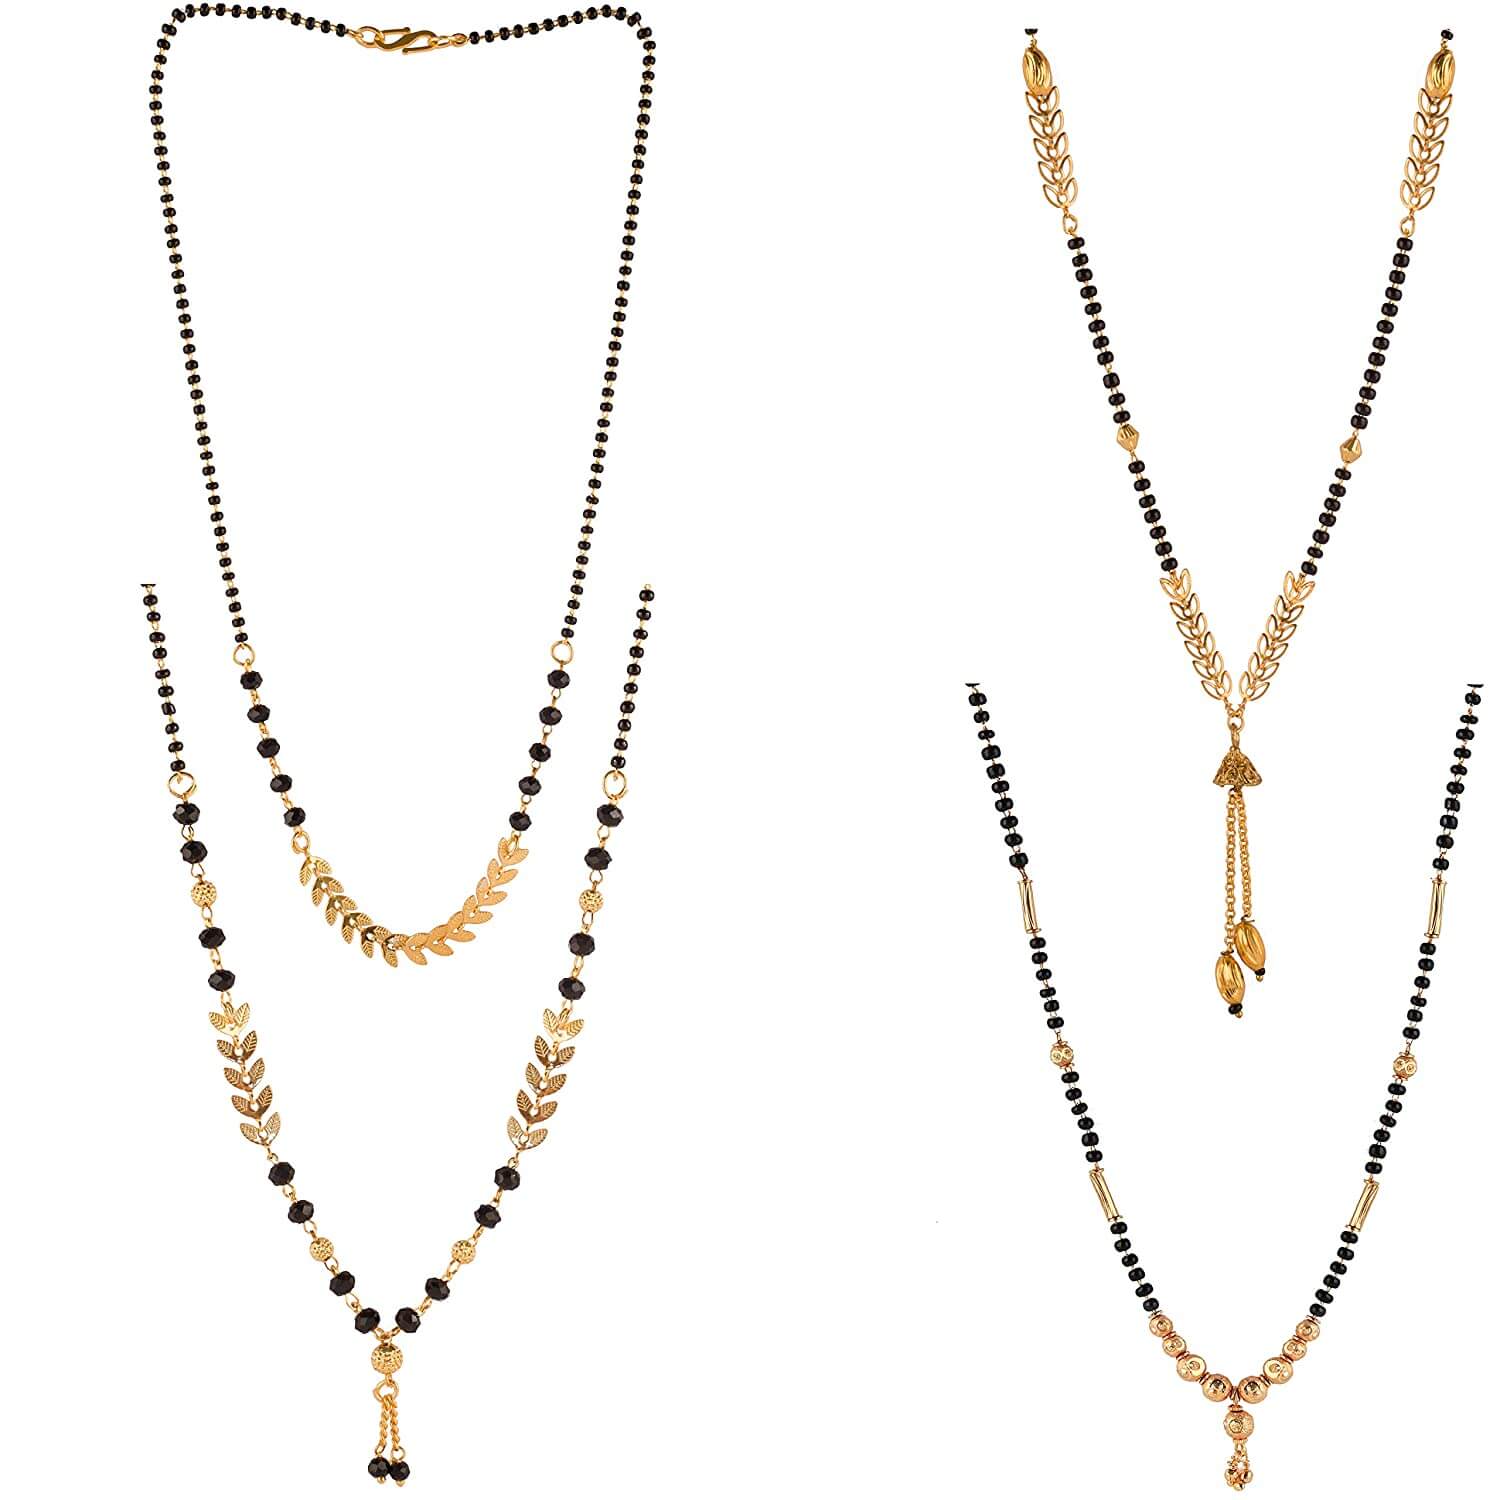 Gold Plated Combo of 4 Mangalsutra Necklace Pendant Tanmaniya